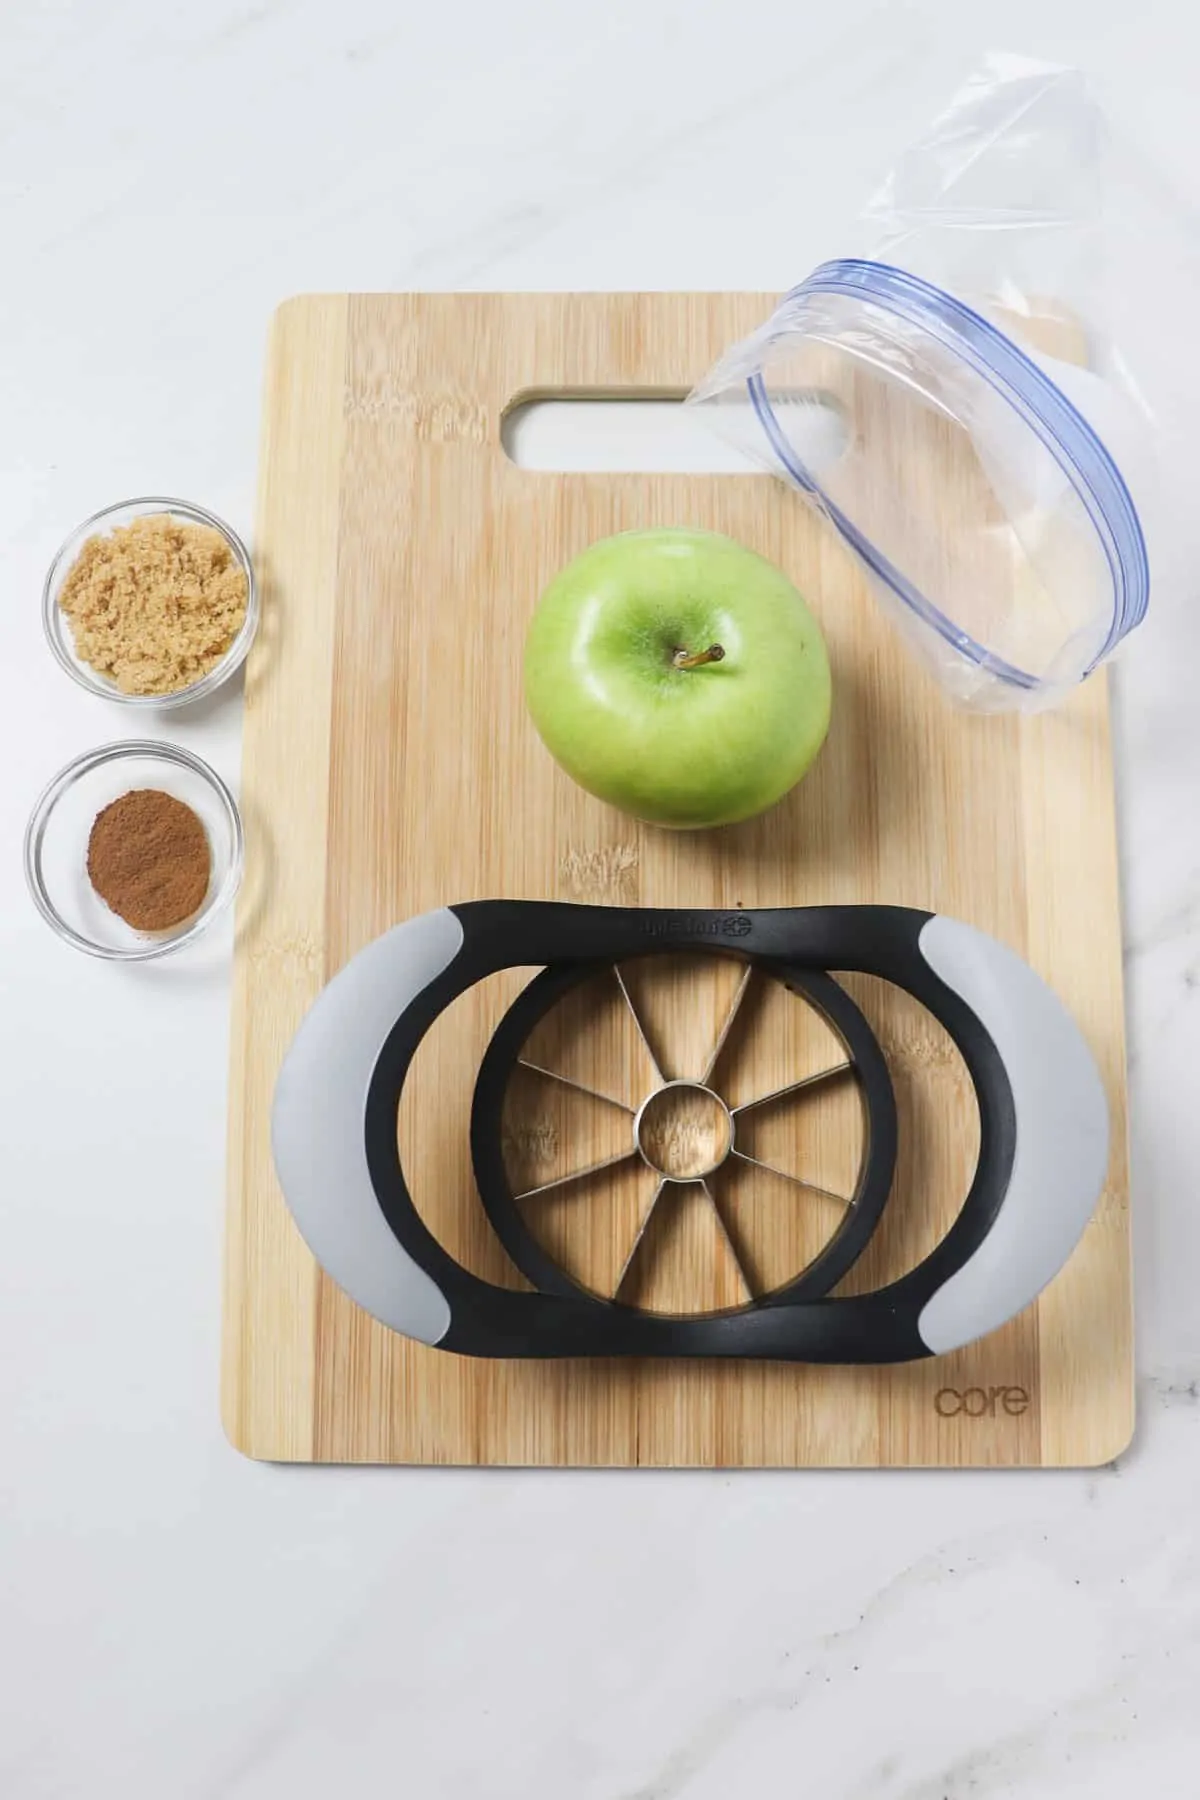 ingredients and tools for making cinnamon sugar apple slices